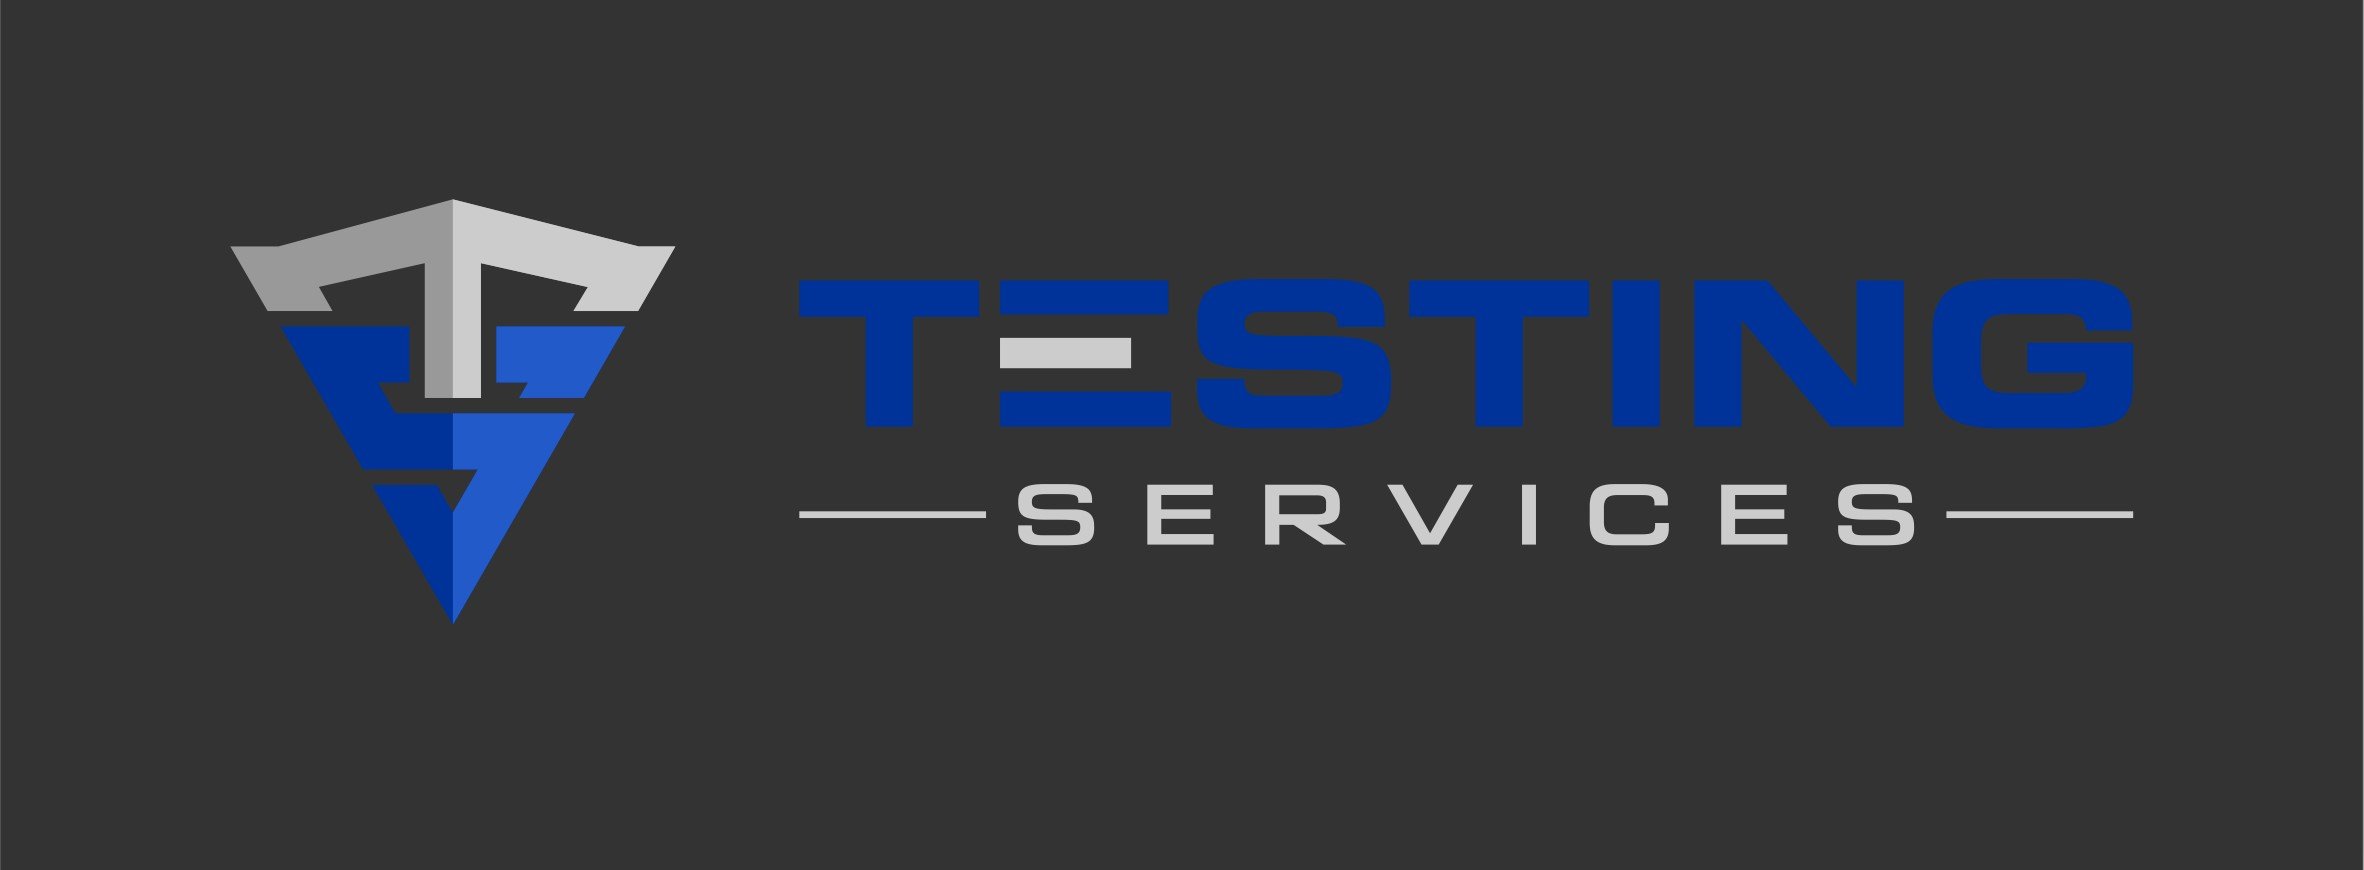 testing services cropped.jpg